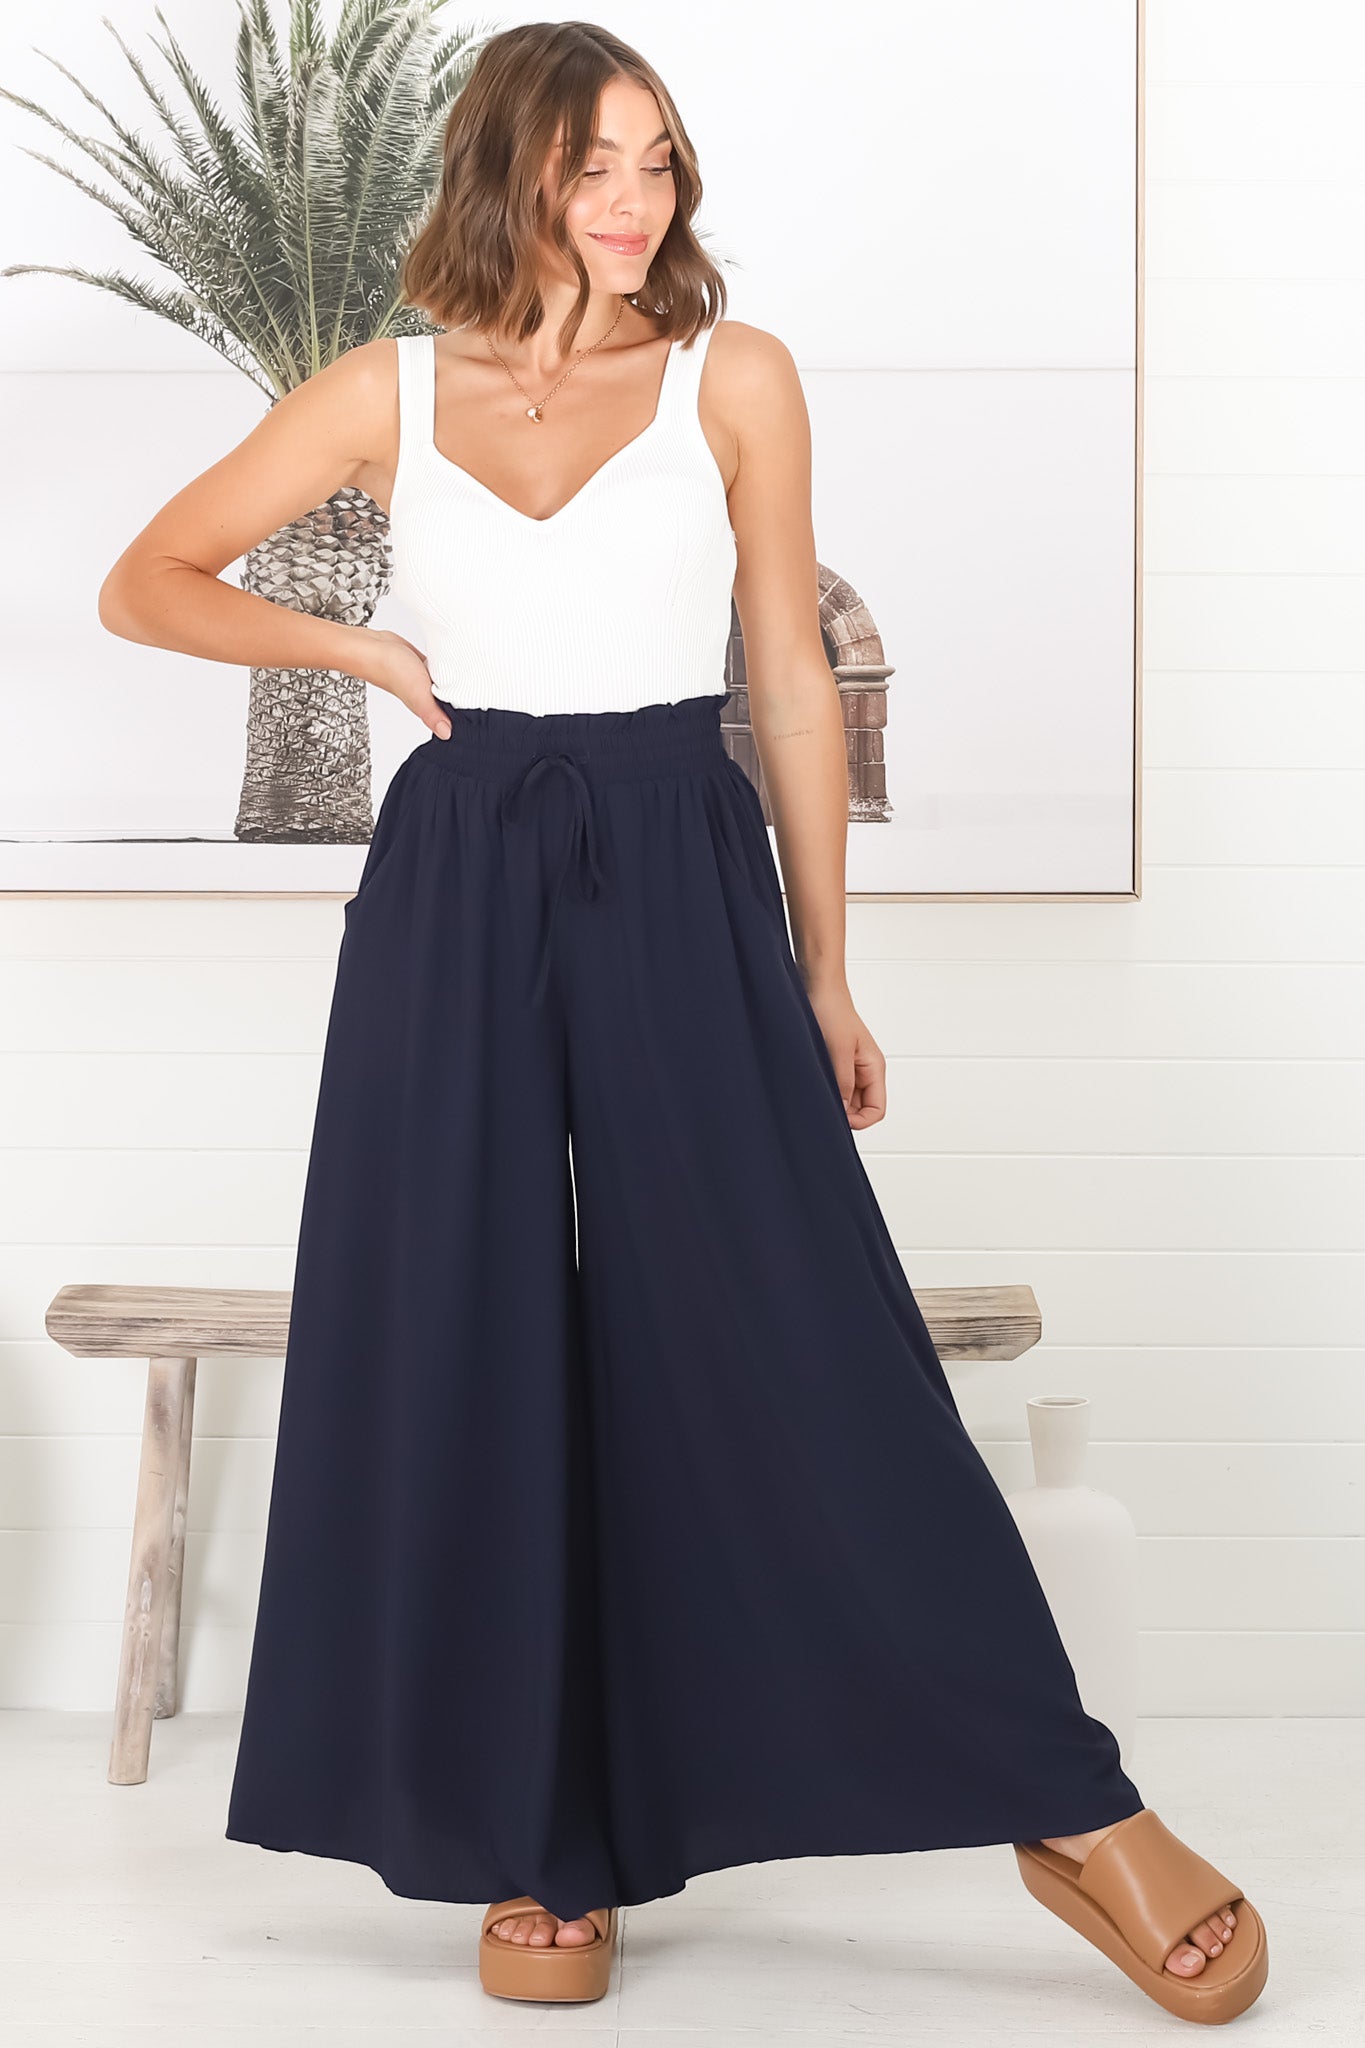 Charli Pants - Paper Bag High Waisted Wide Leg Pants in Navy